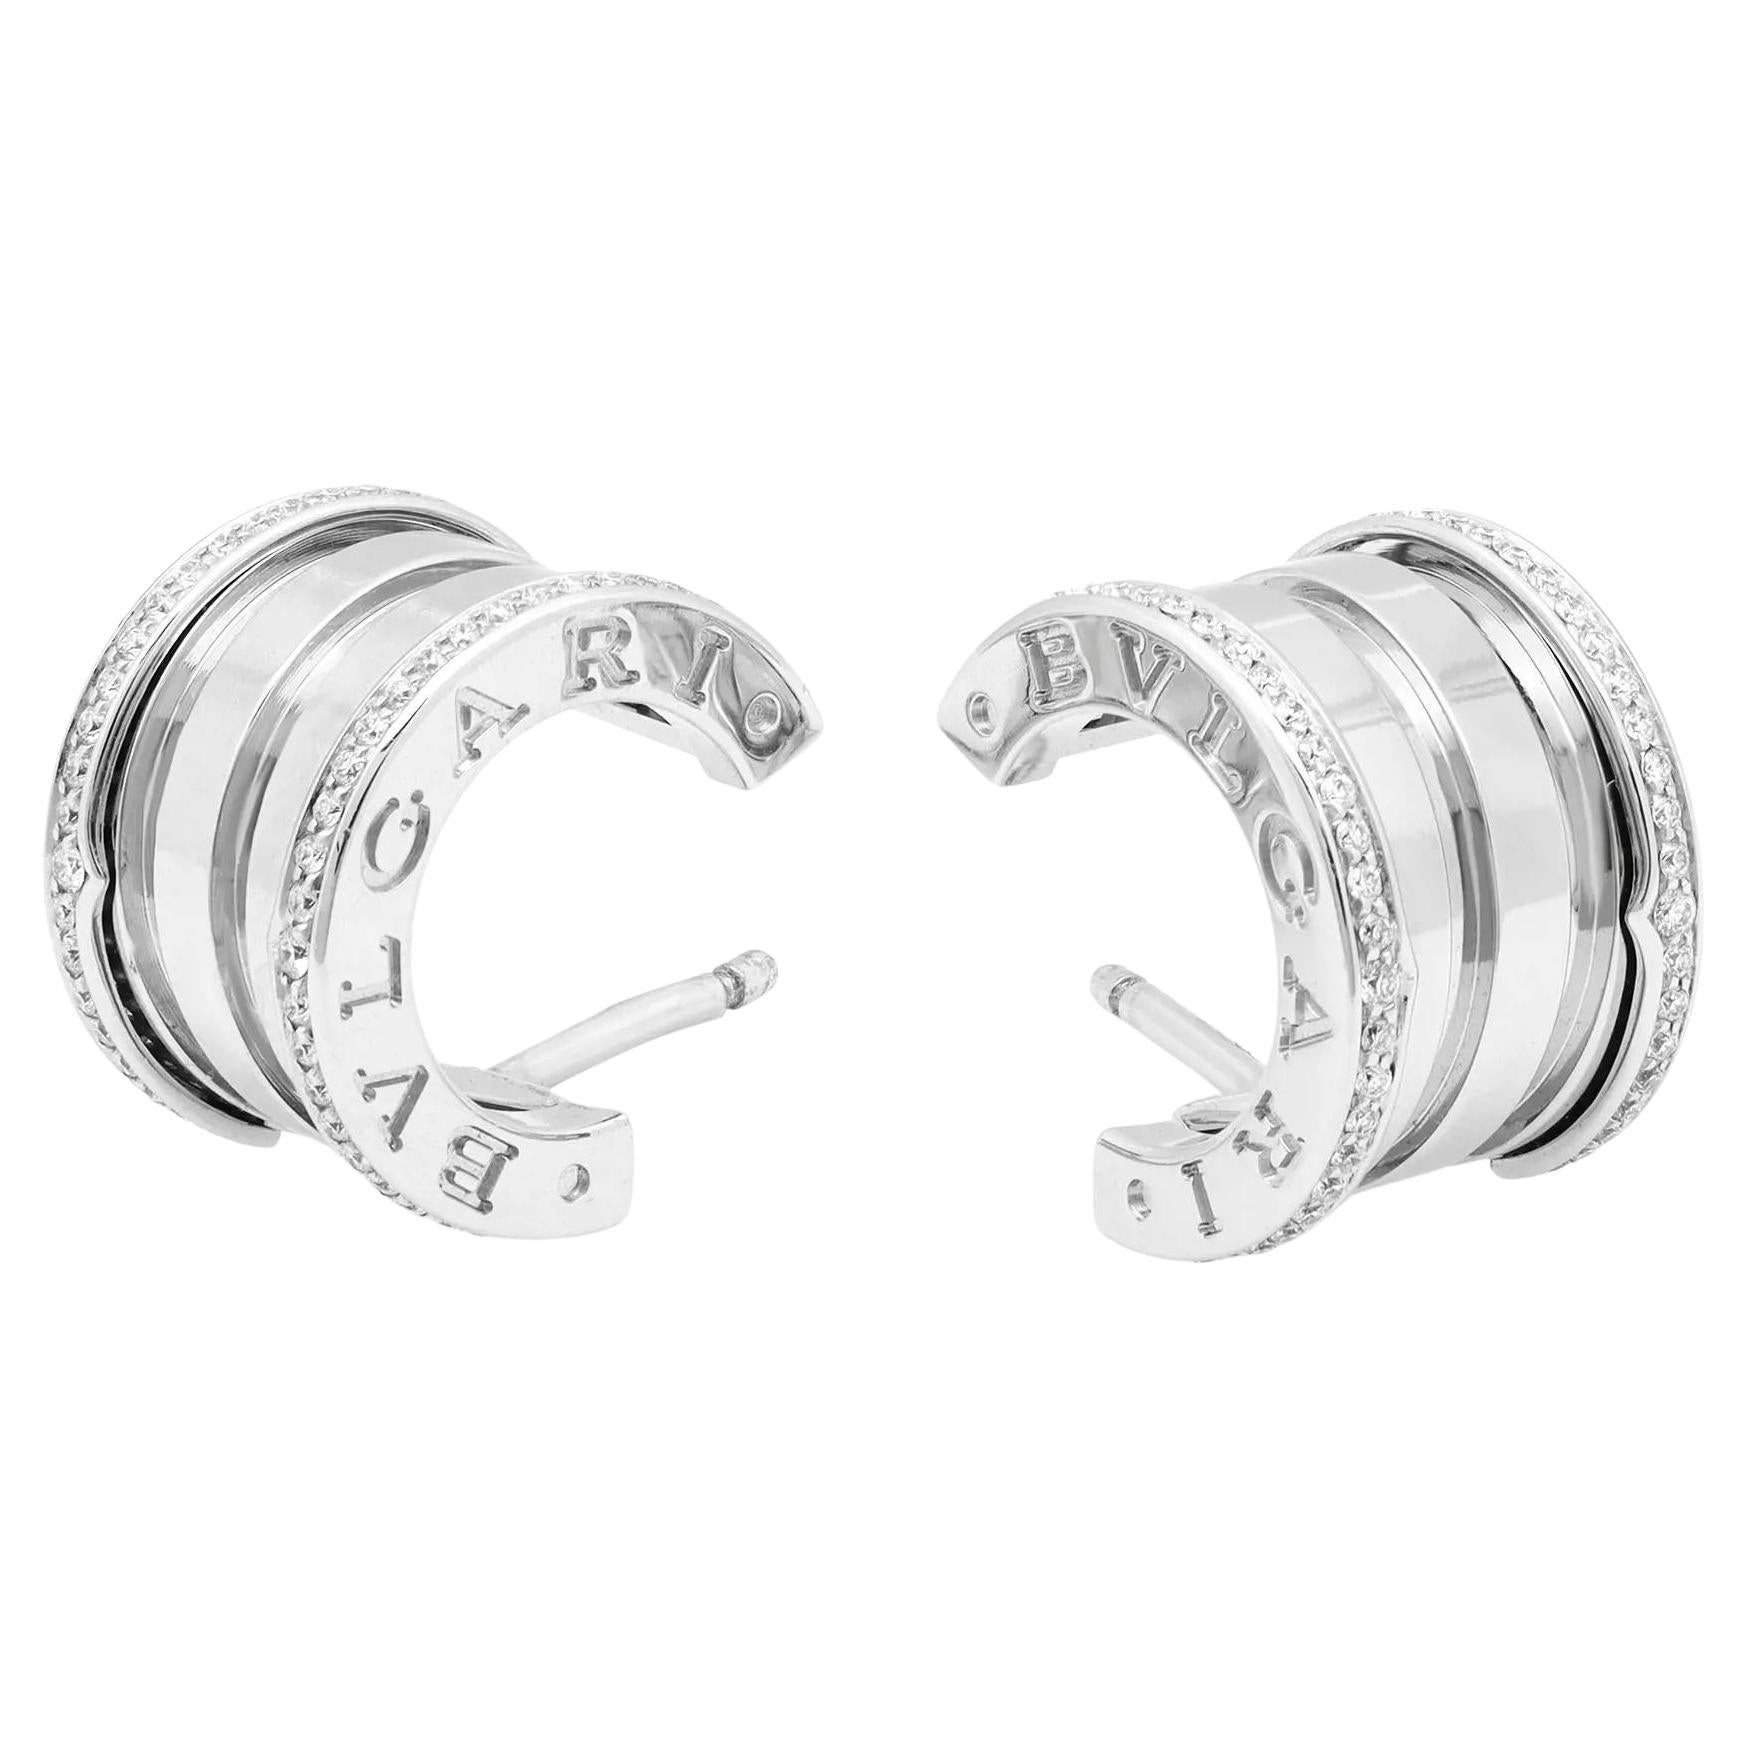 These dazzling diamond huggie earrings from the house of Bvlgari are a perfect addition to your jewelry collection. Crafted in fine 18K white gold, it features pave set round brilliant cut diamonds set on the outer rim of the earrings with engraved